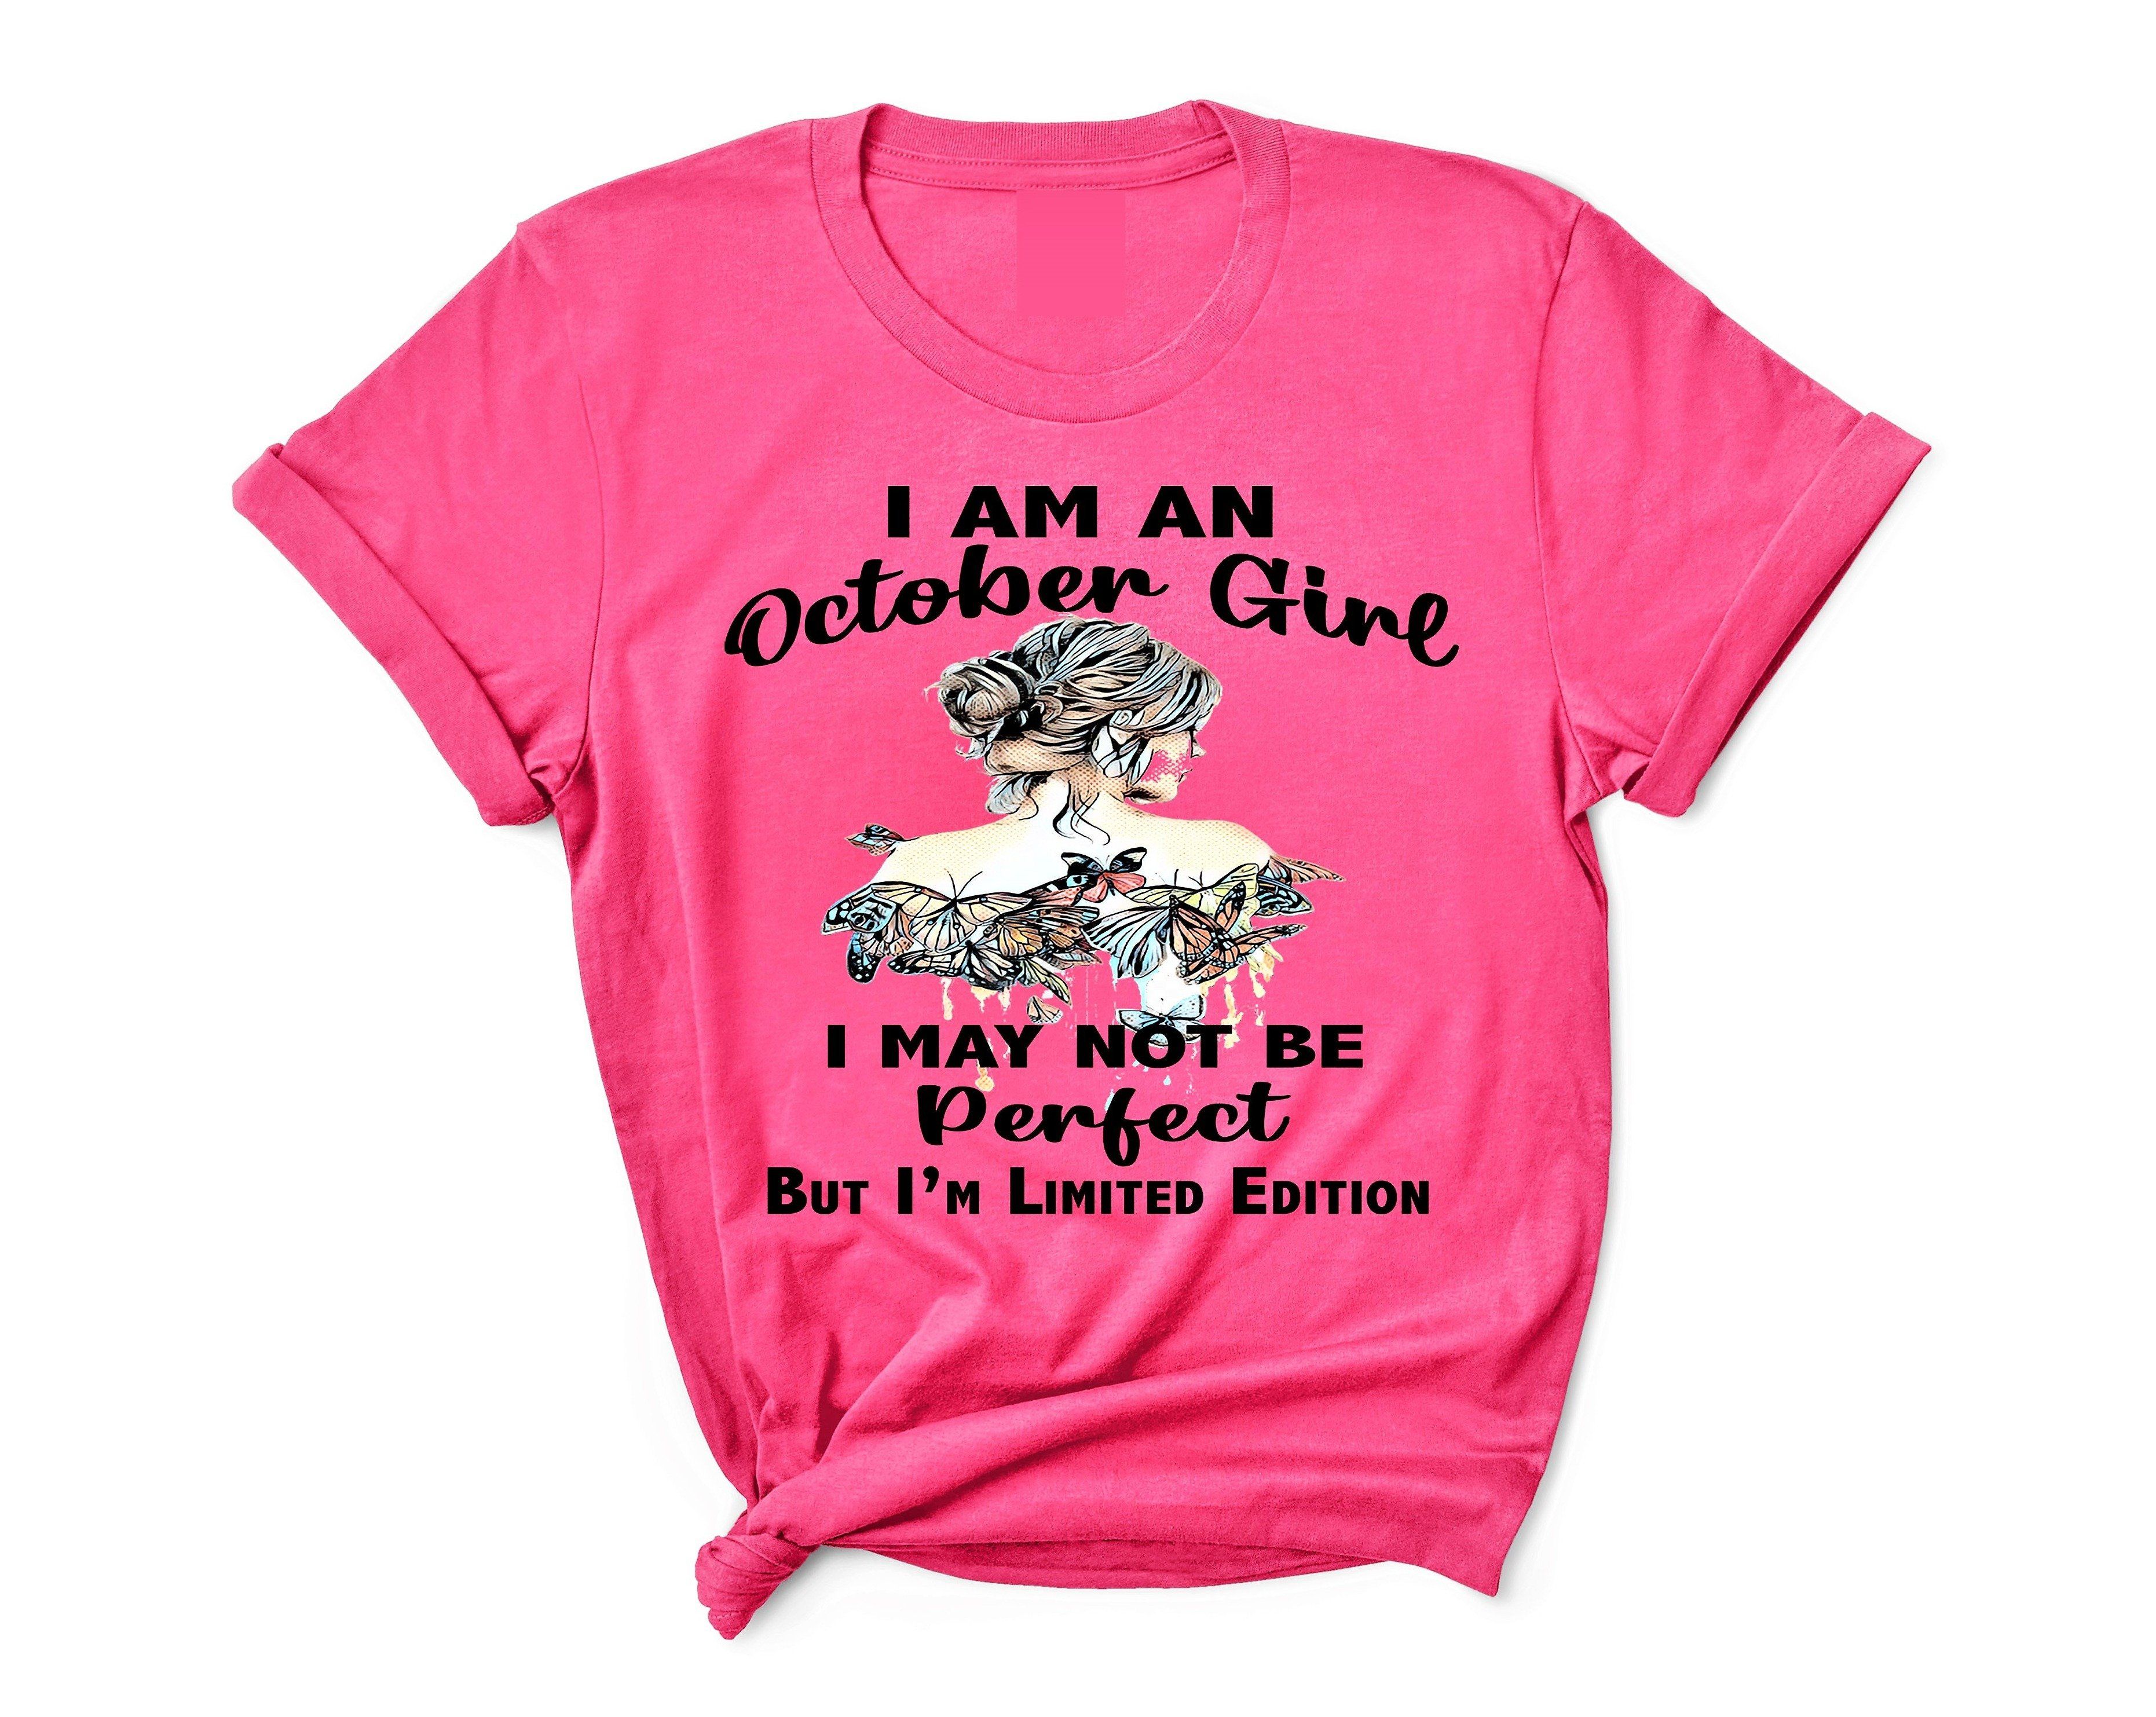 "May Not be perfect but Limited Edition - October Girl